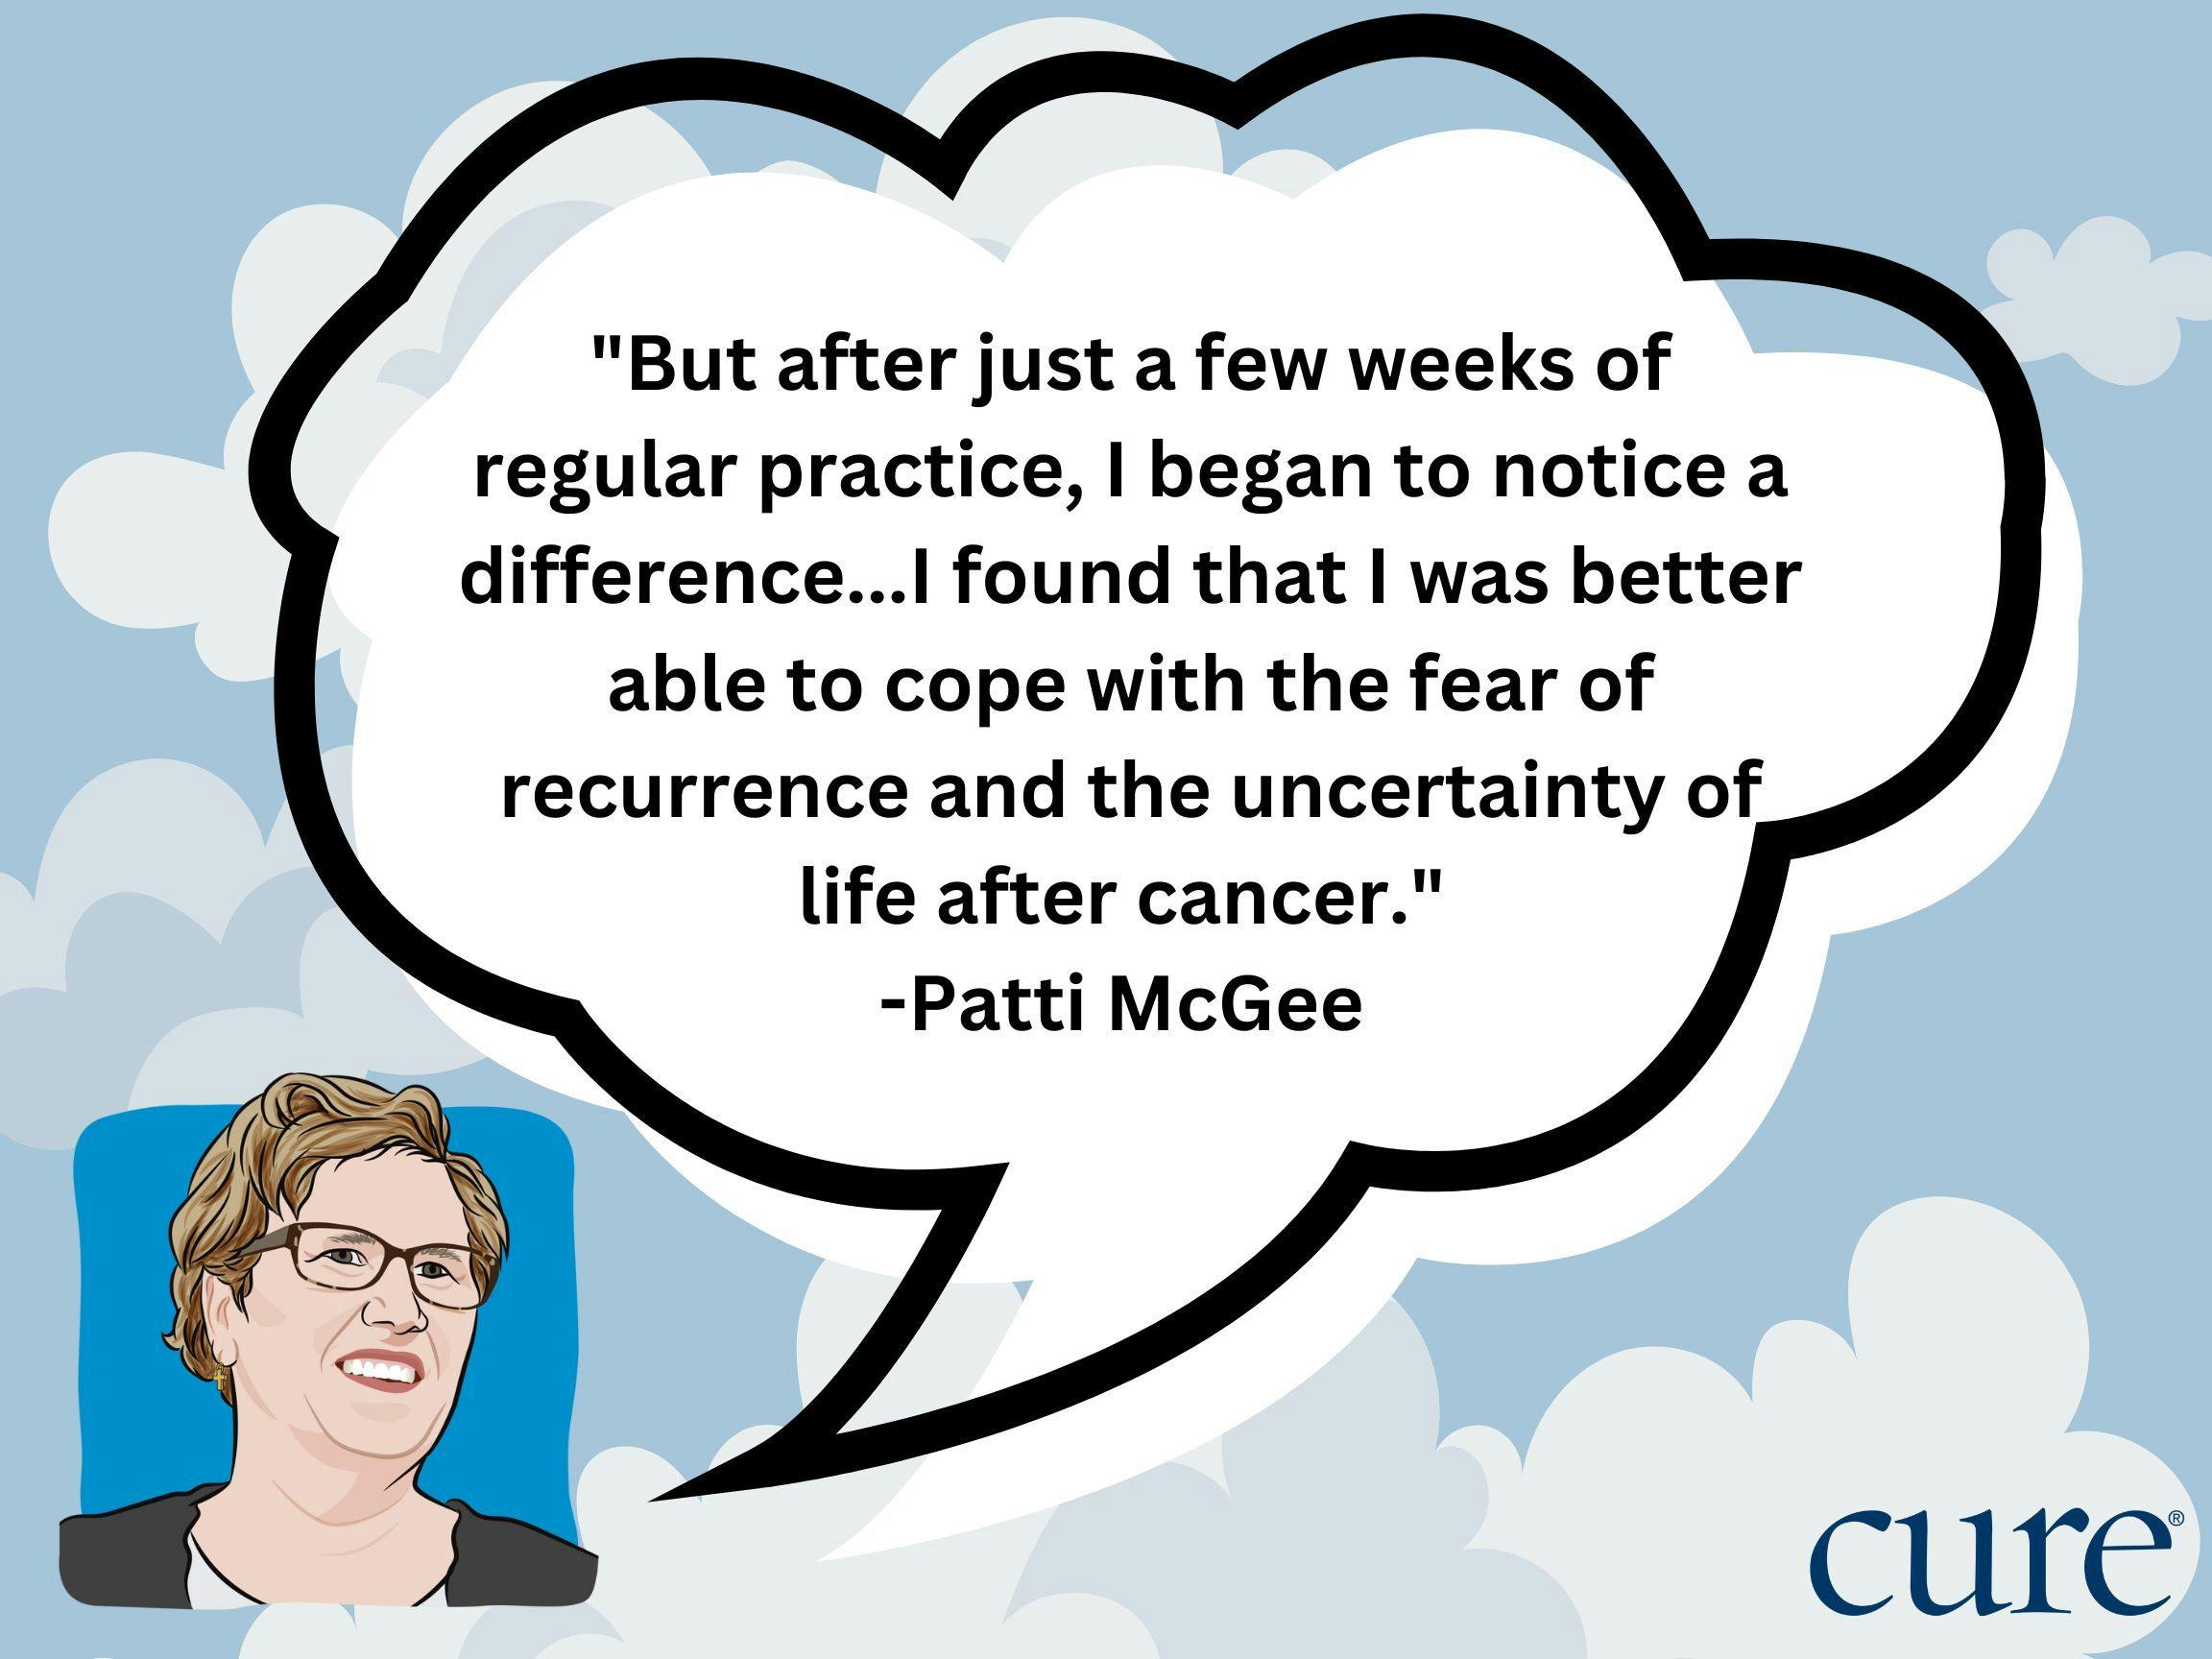 quote from cancer survivor, Patti McGee saying, "But after just a few weeks of regular practice, I began to notice a difference...I found that I was better able to cope with the fear of recurrence and the uncertainty of life after cancer."  